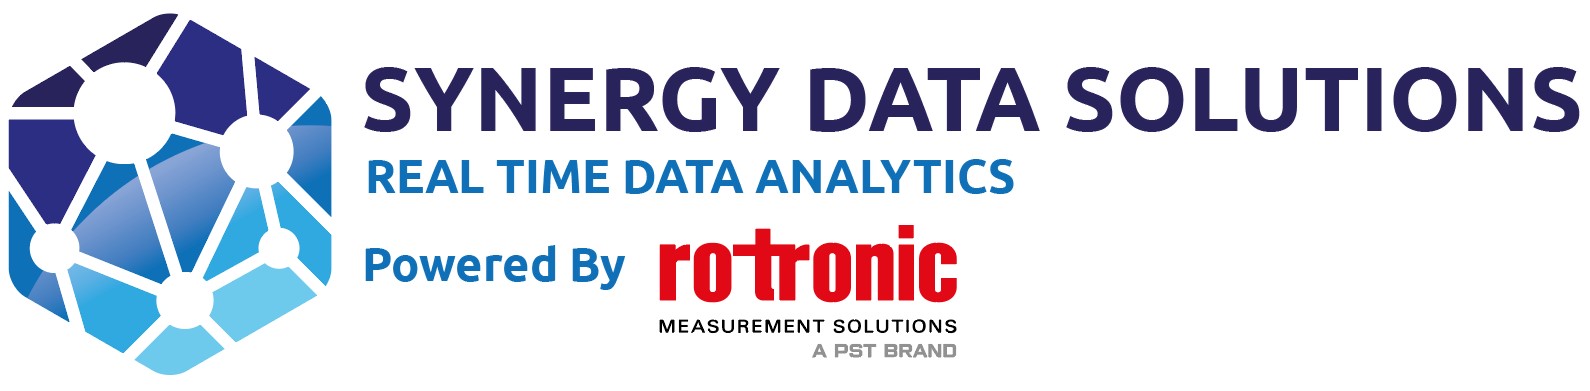 Synergy Data Solutions